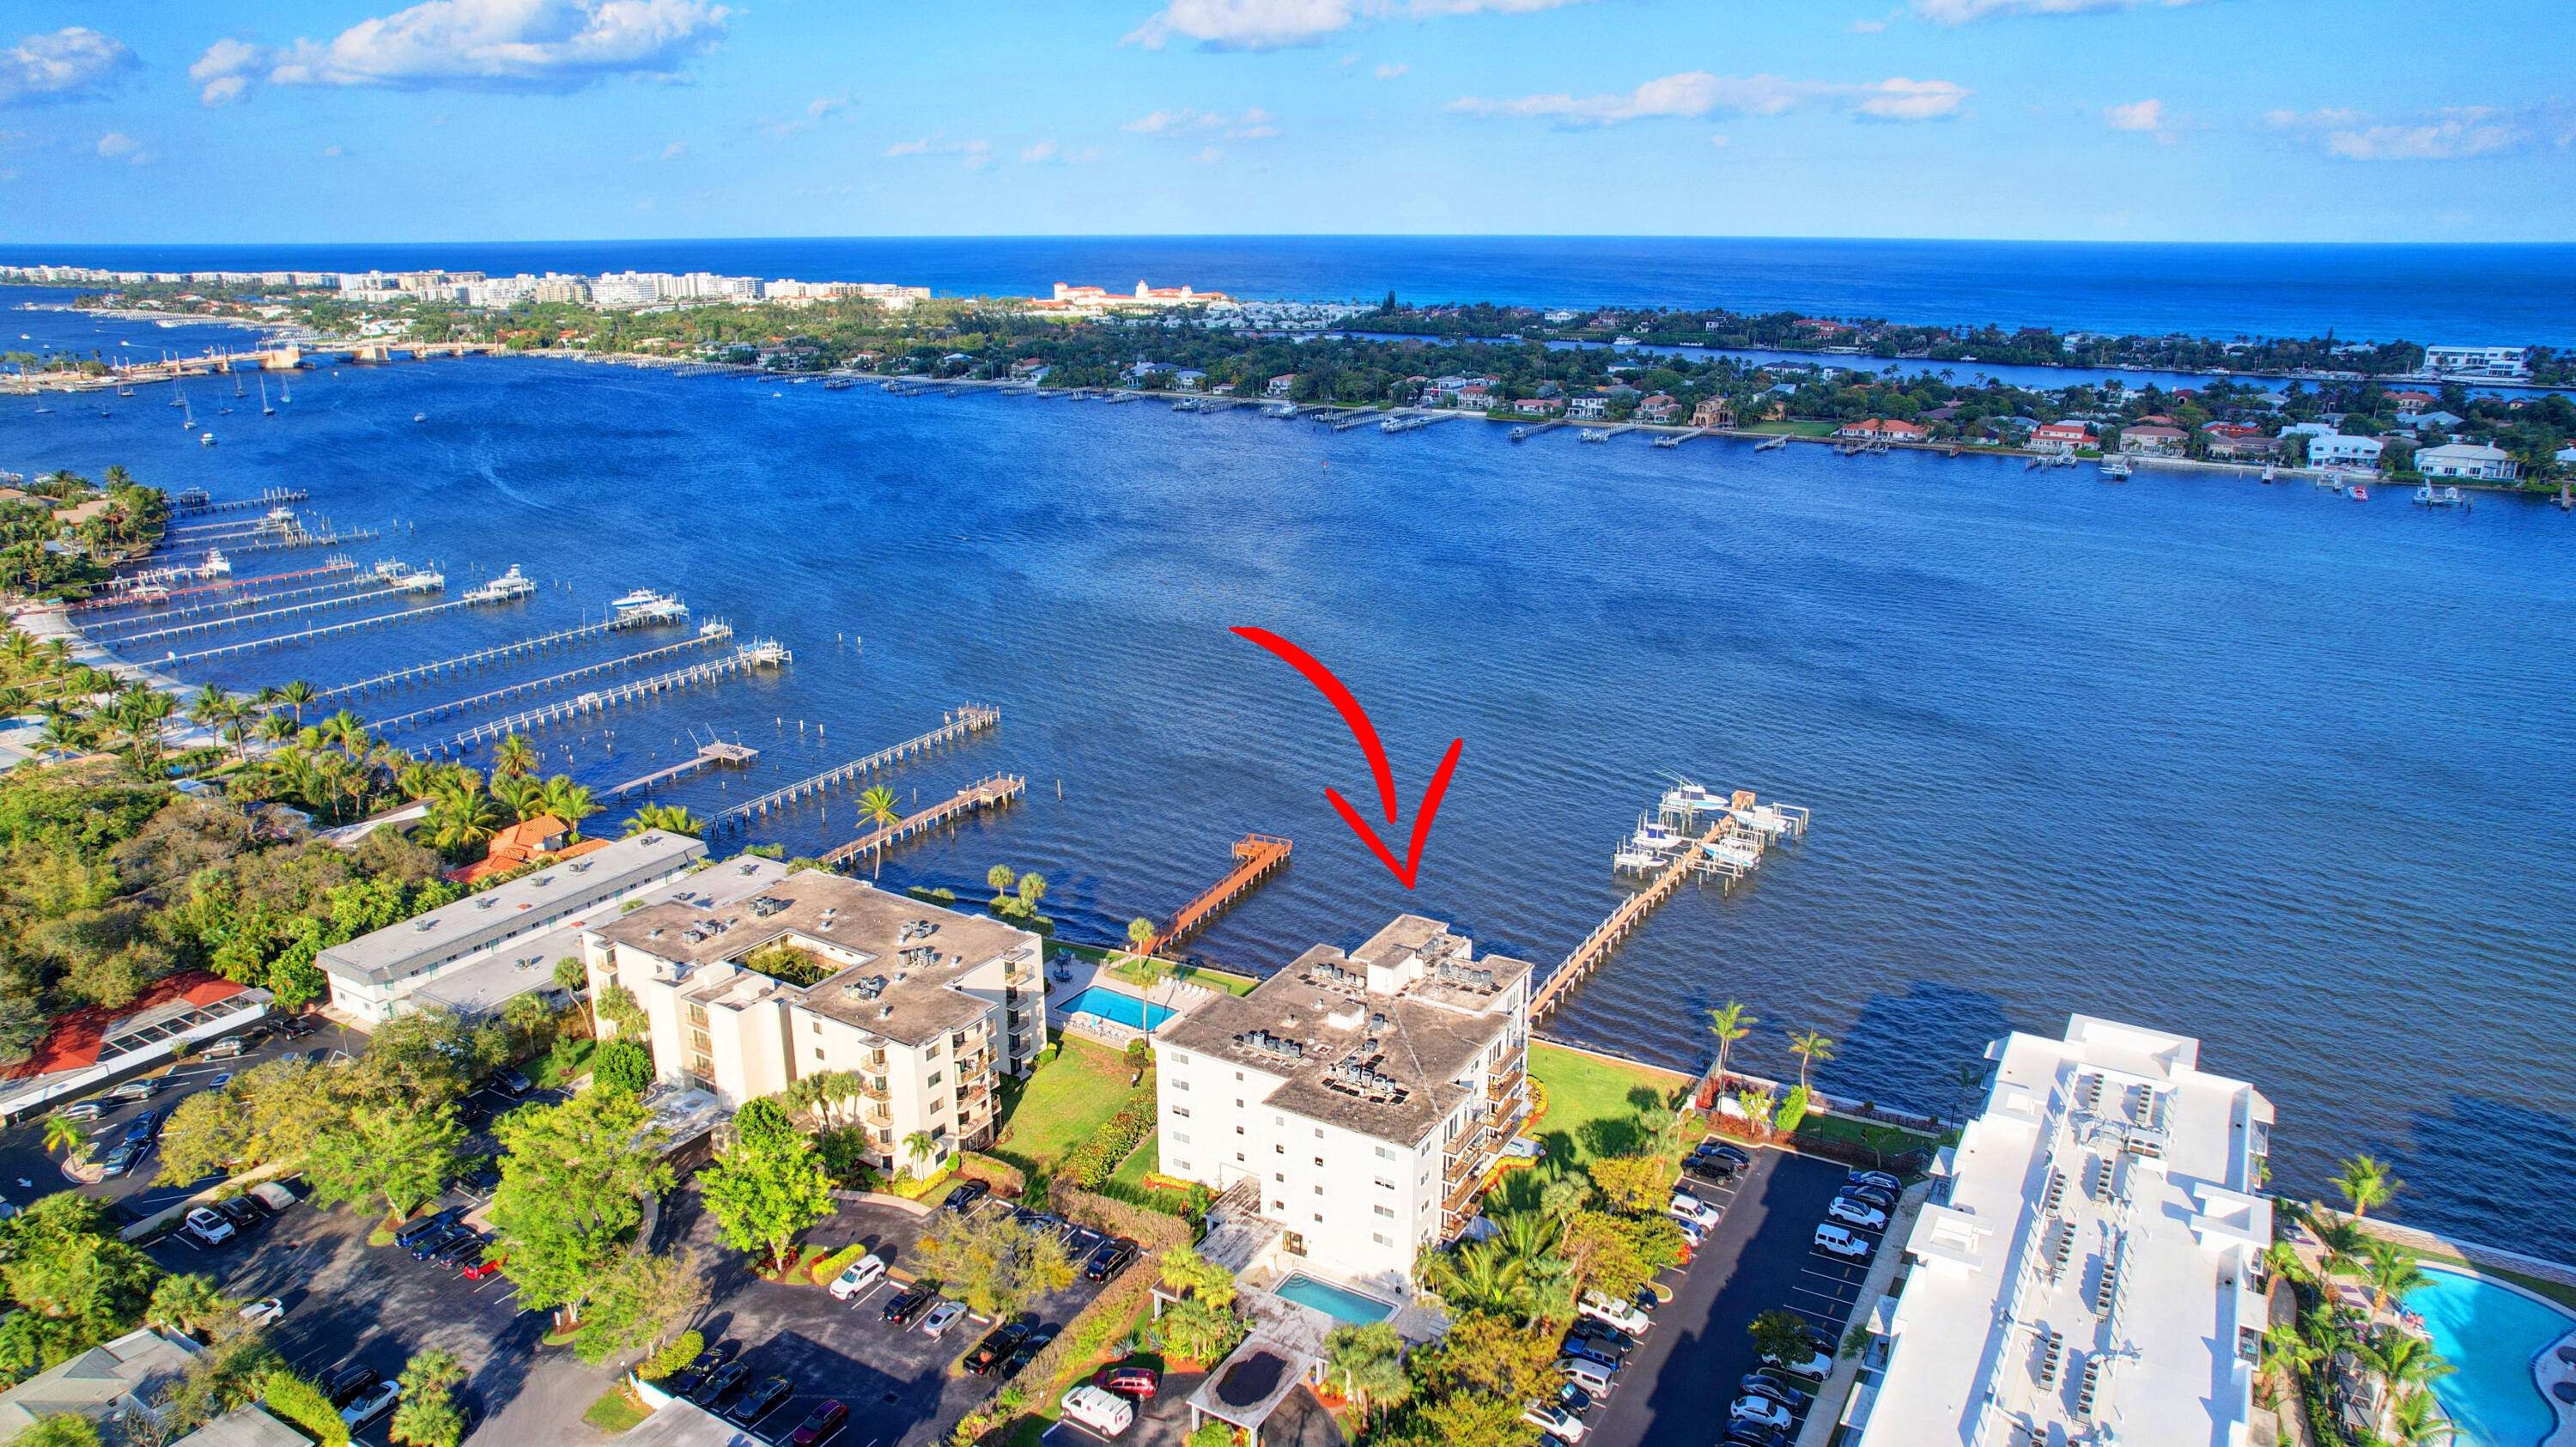 Experience the ultimate waterfront lifestyle in this spectacular BOATERS PARADISE condo complete with PRIVATE BOAT DOCK with easy access to ocean.